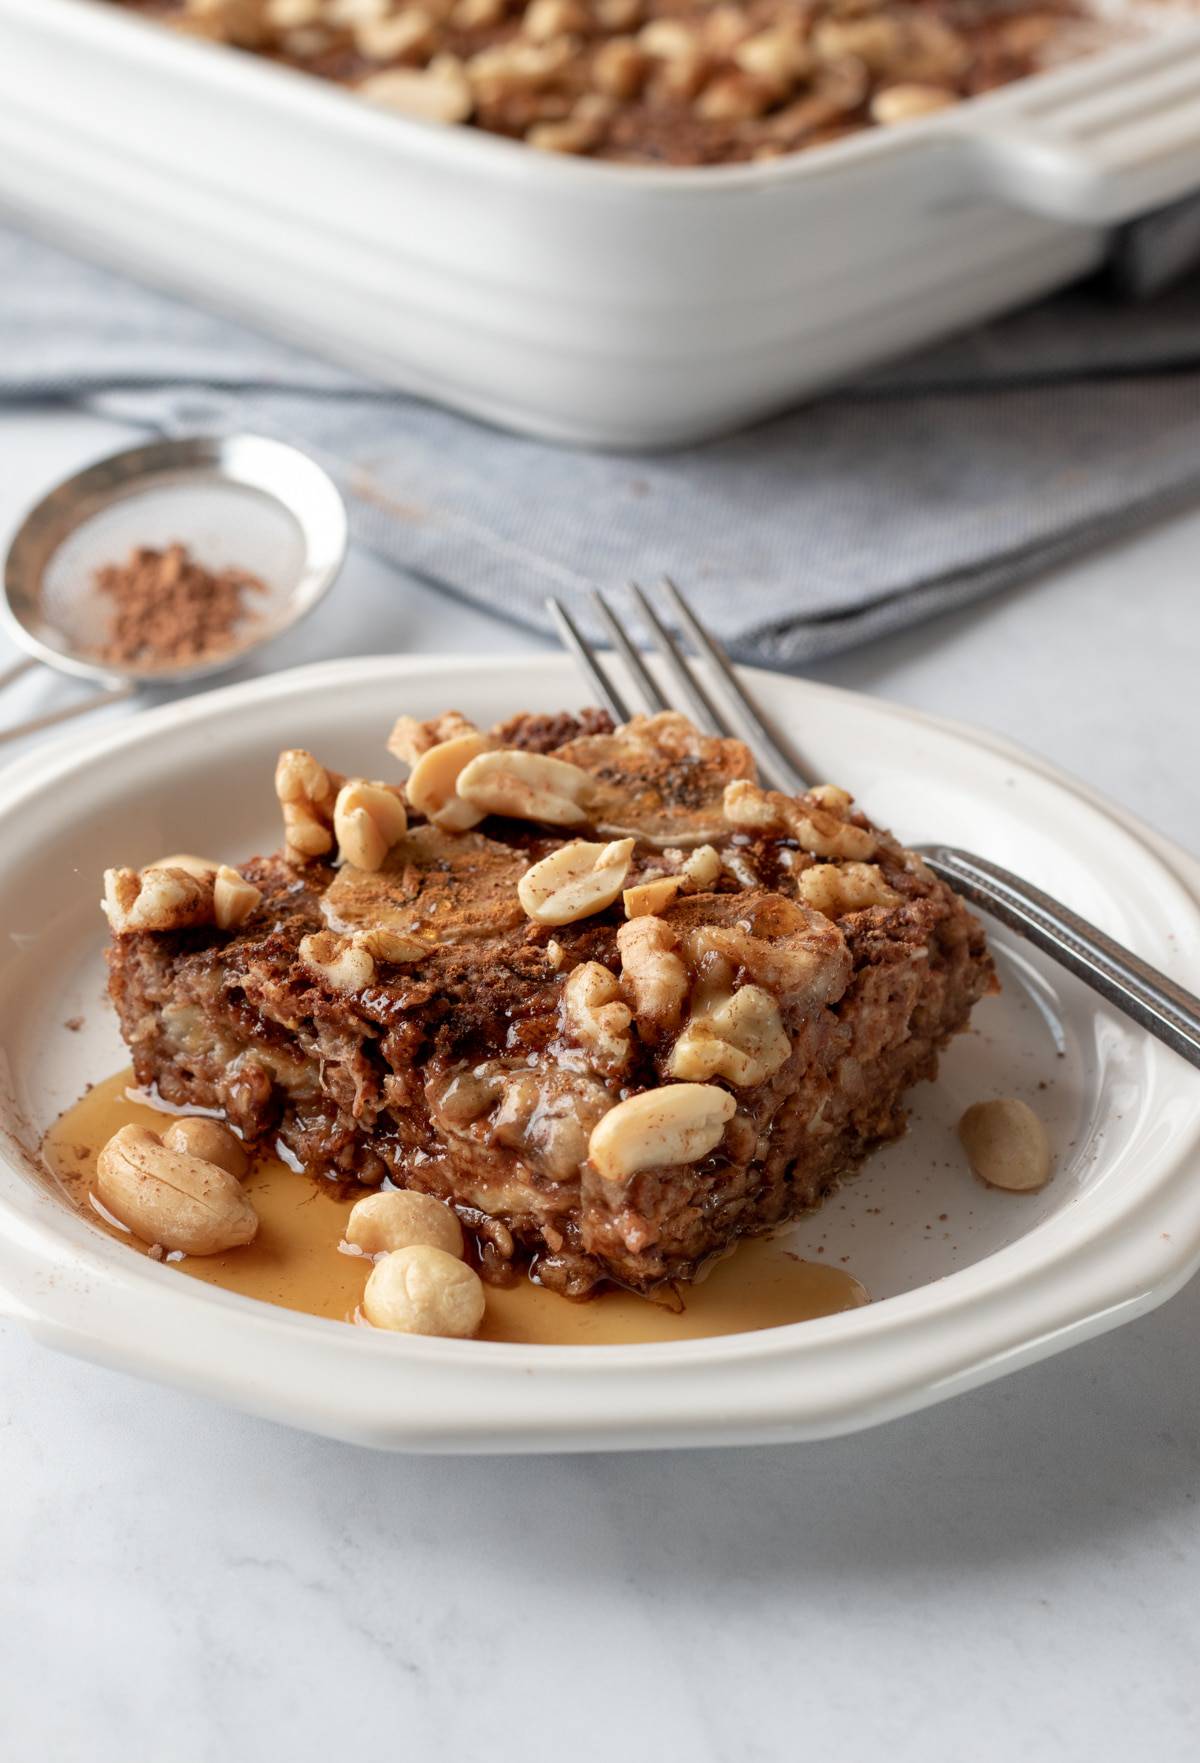 Chocolate banana baked oats on a white plate drizzled with maple syrup.